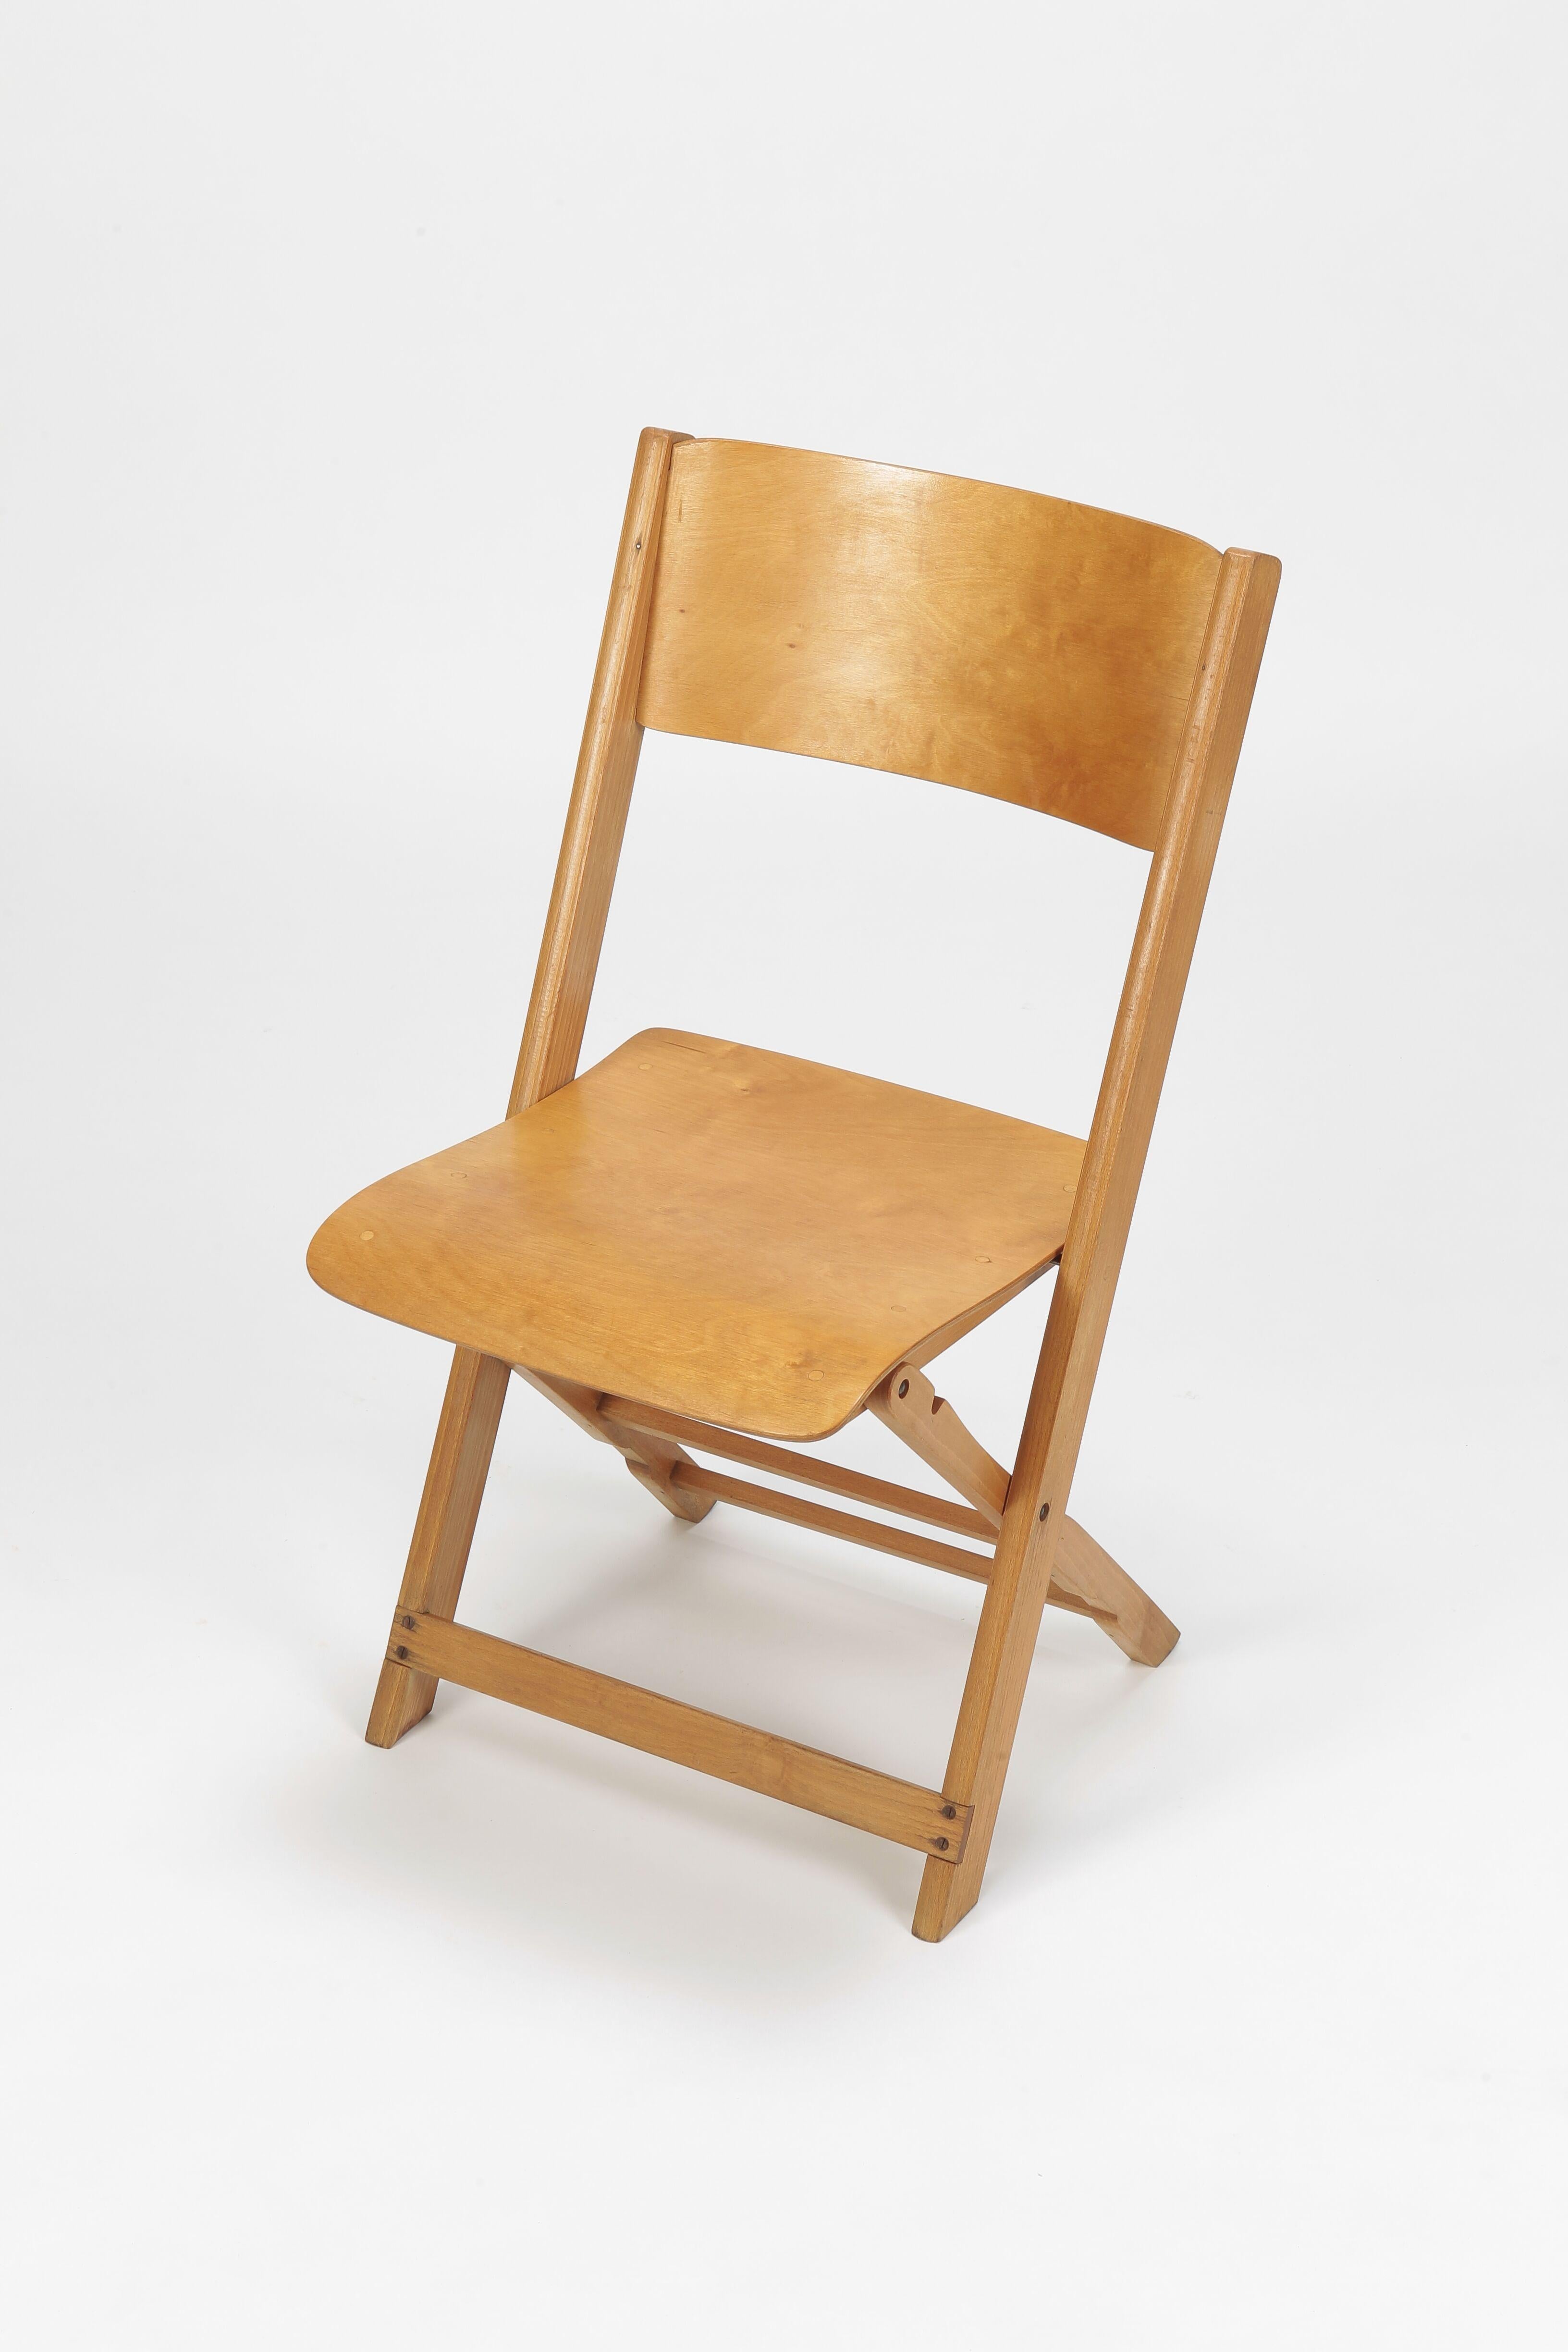 Swiss Midcentury Modern Birchwood Folding Chair, Wohnbedarf 1940s, Light Brown, European, Switzerland

Charming Swiss birchwood folding chair from the 1940s, made by Wohnbedarf. The chair gleams in goldish yellow and its high quality finish is